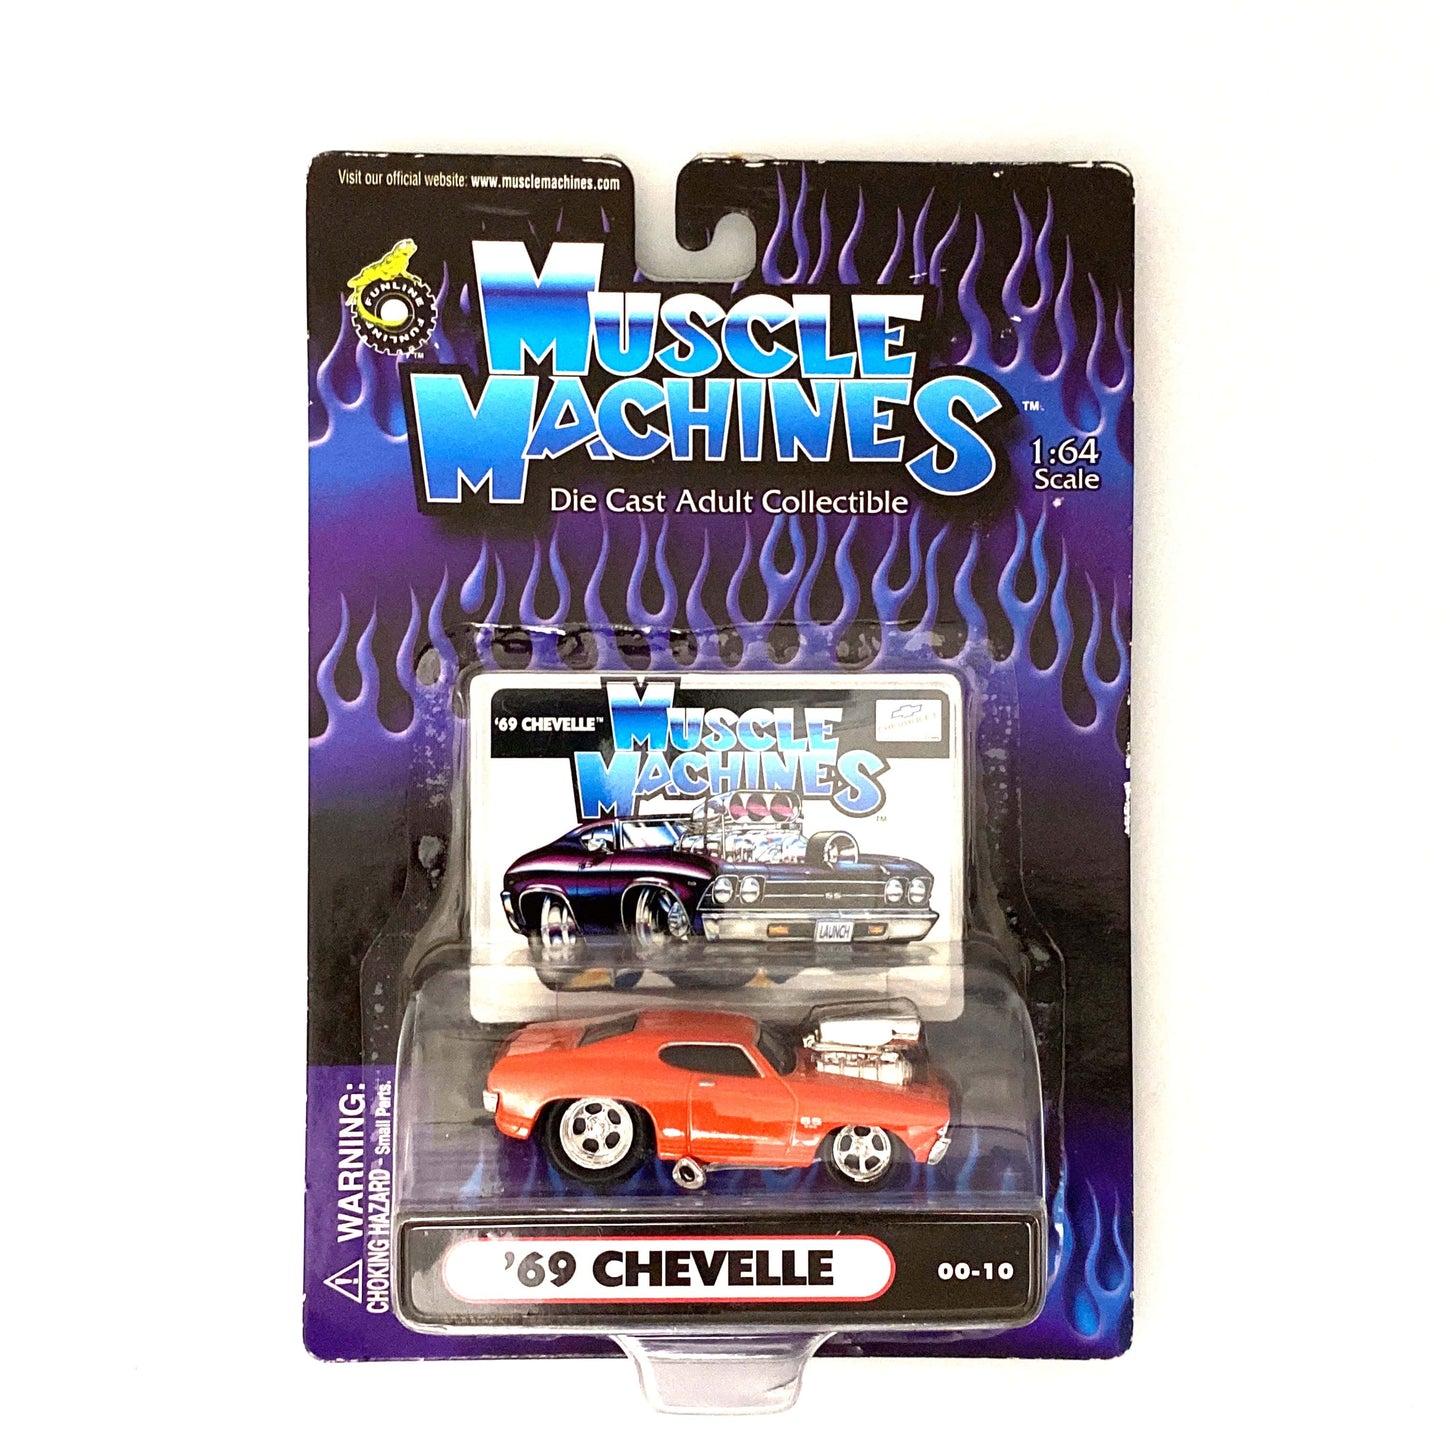 Muscle Machines '69 Chevelle Orange Diecast Collectible Car 1:64 Scale Model #00-10